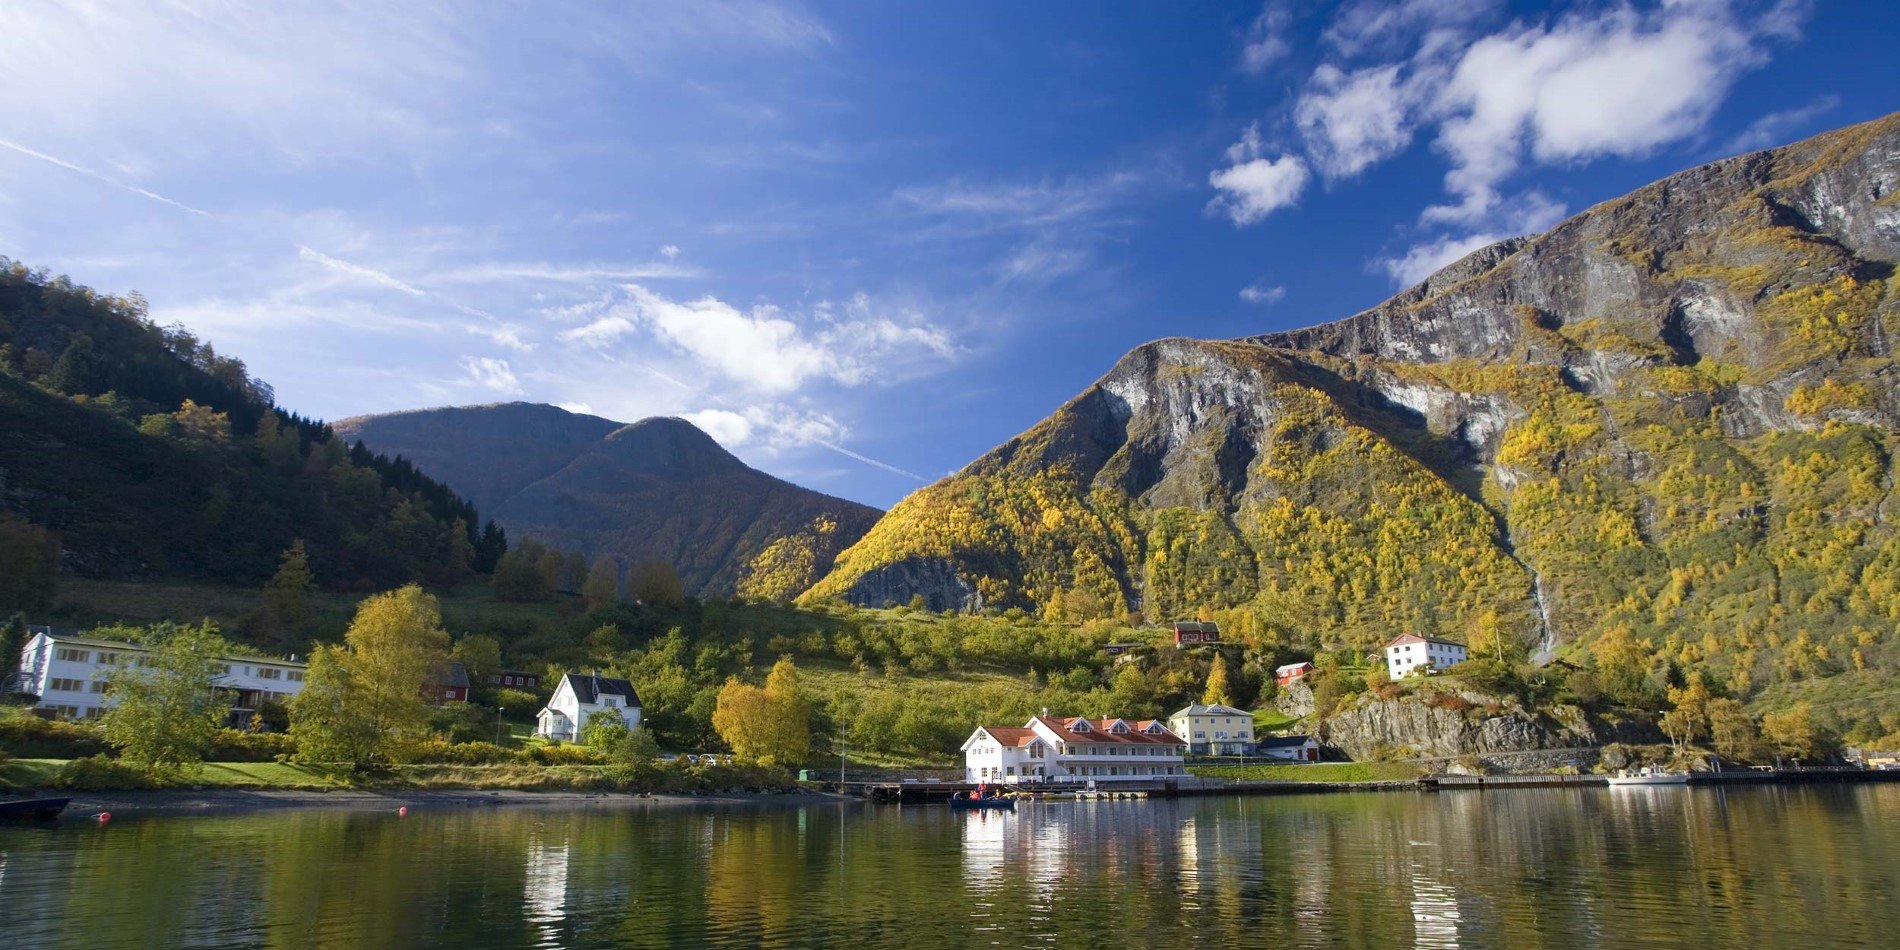 The dramatic scenery in the Sognefjord is one of Norway's most famous attractions